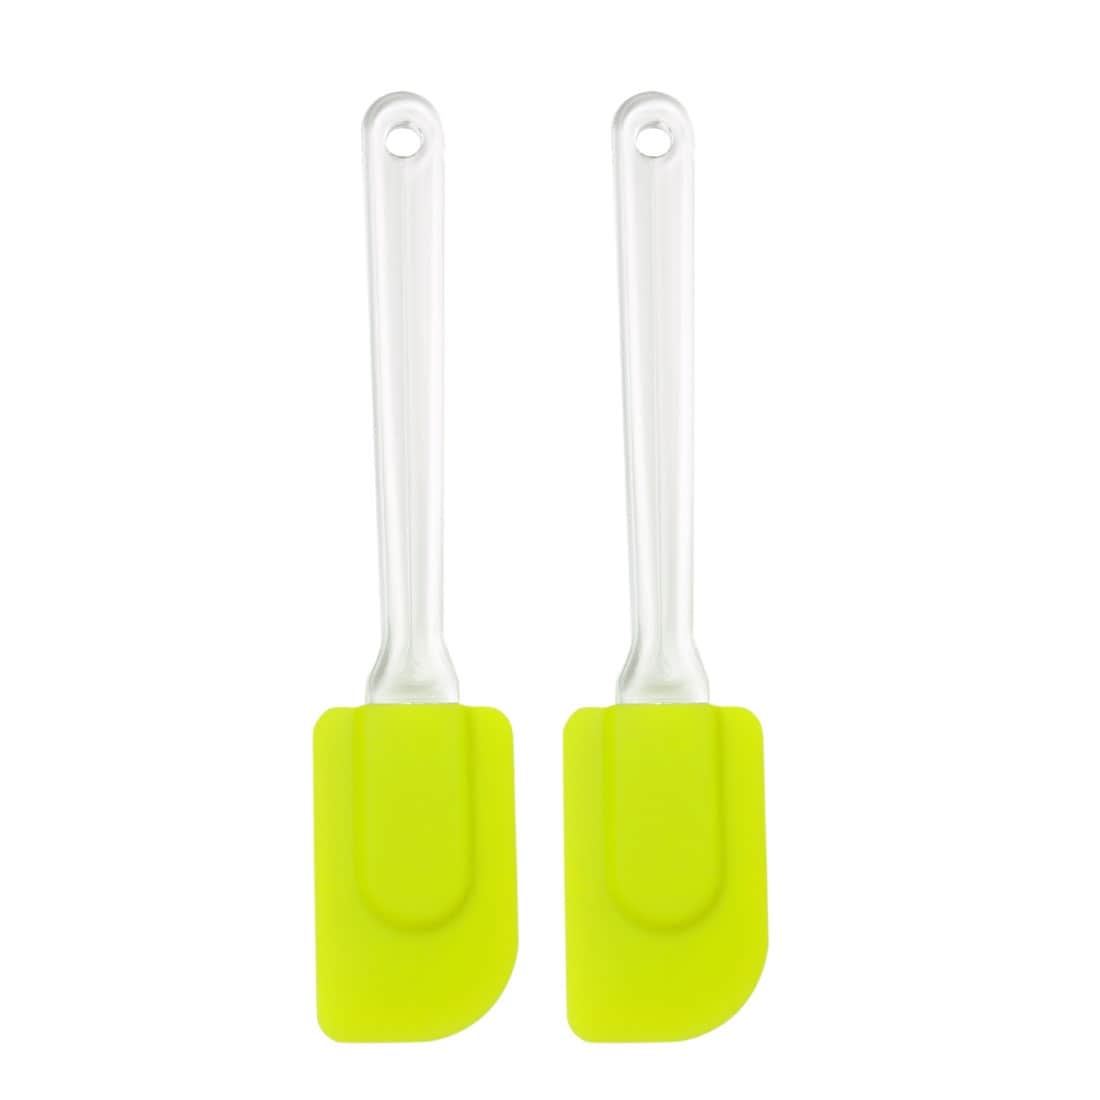 https://ak1.ostkcdn.com/images/products/is/images/direct/1e912a51531aaab5f4a56e523607fc3c0cebe477/2pcs-Flexible-Silicone-Spatula-Heat-Resistant-Non-scratch-Kitchen-Turner-Non-Stick-Scrape-for-Cooking-Baking-Green.jpg